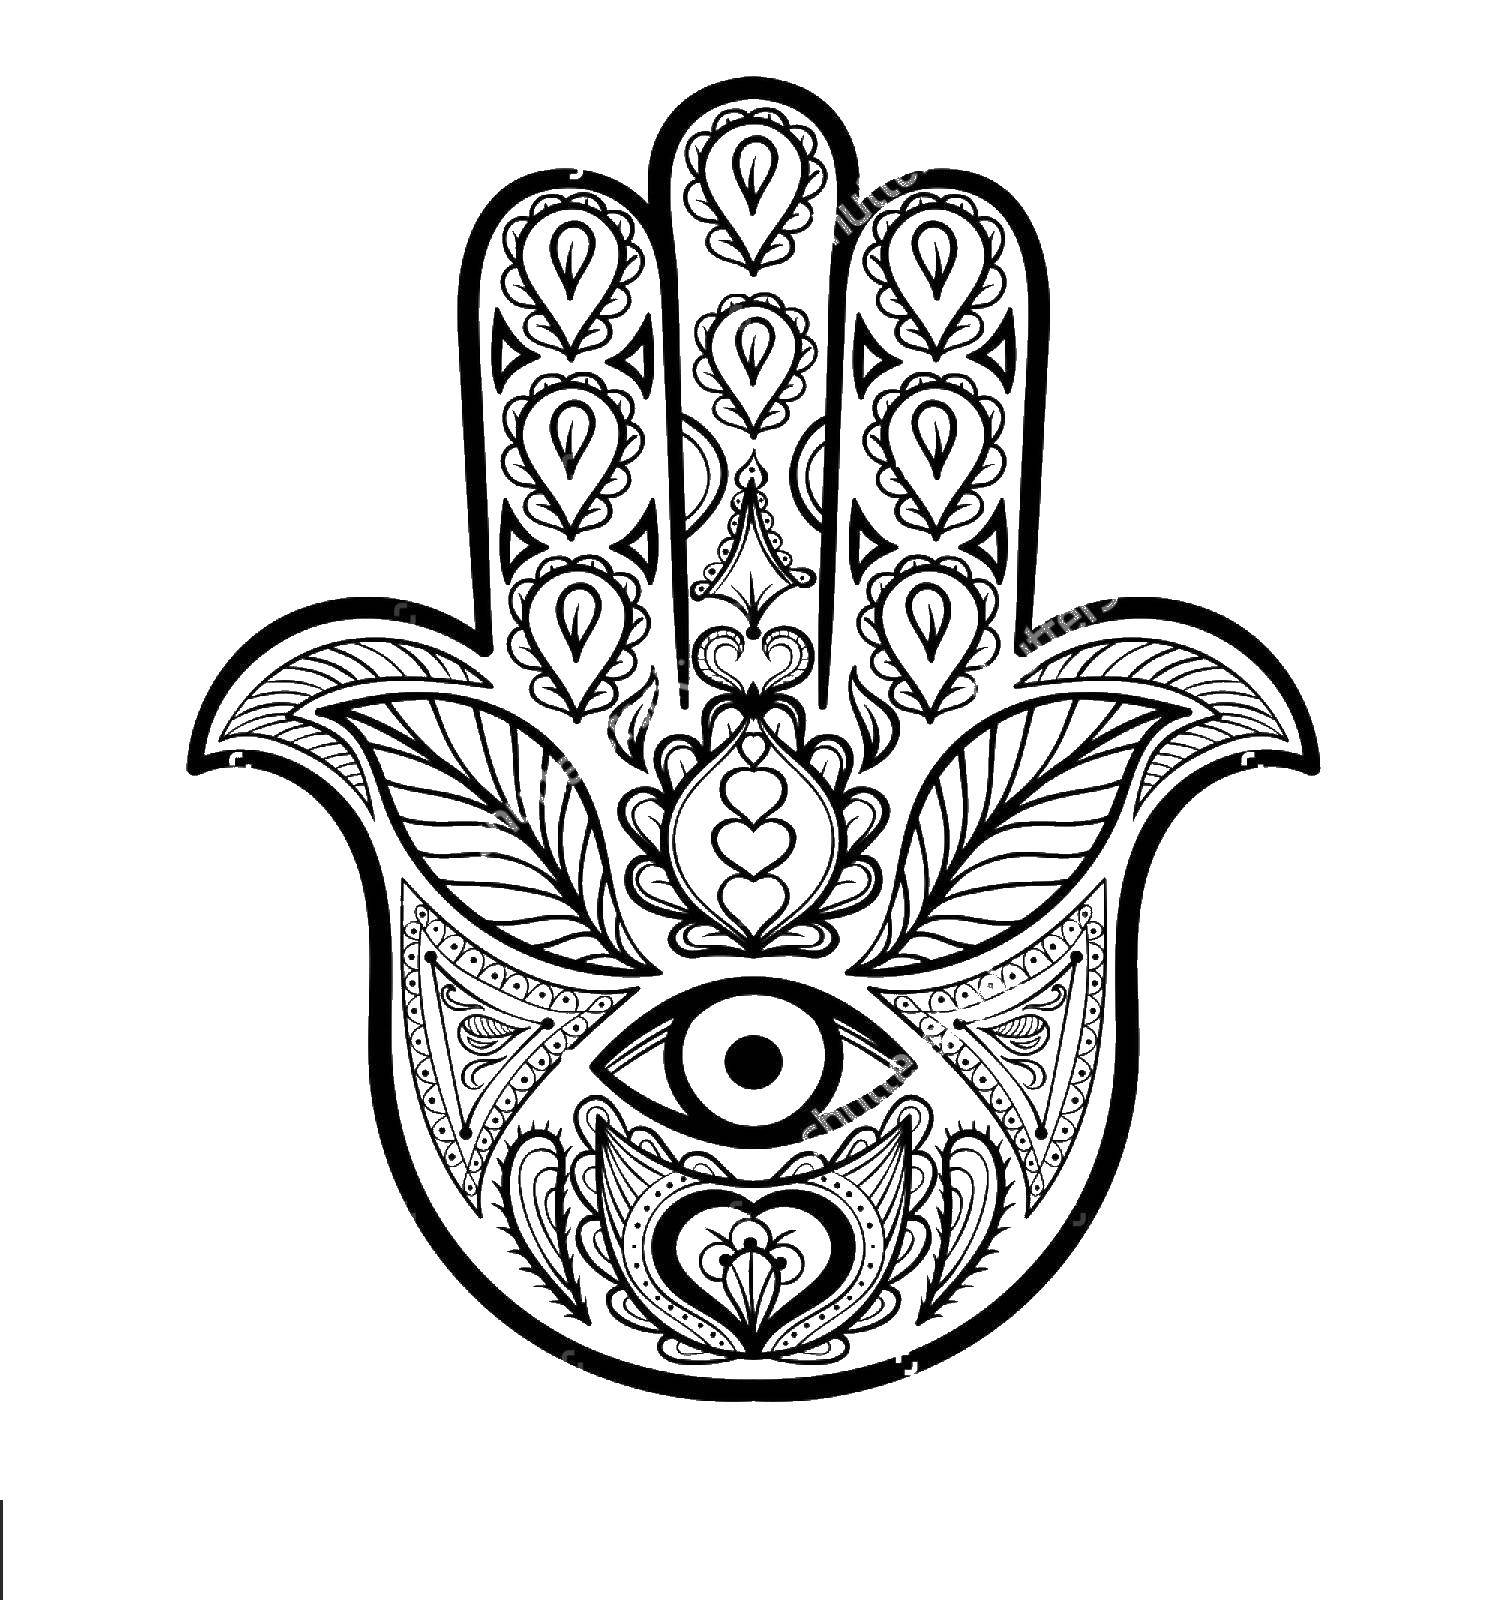 Coloring Patterned hand. Category The contour of the hands and palms to cut. Tags:  Patterns, ethnic.